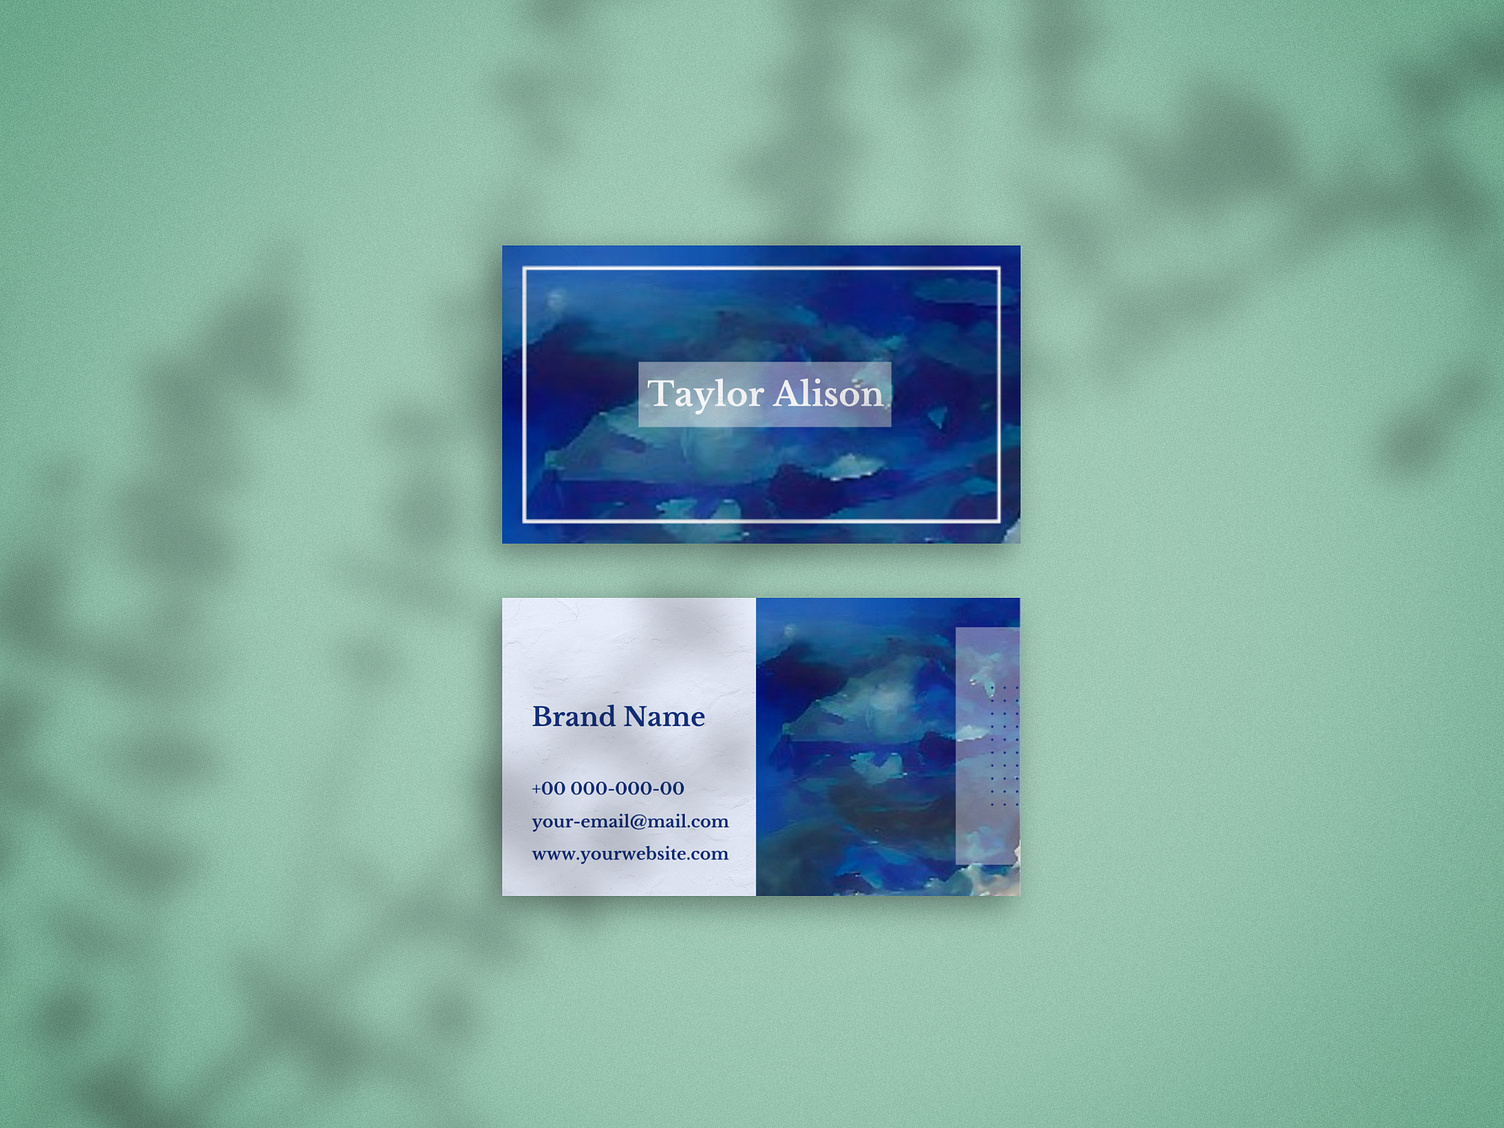 business-card-template-professional-canva-templates-by-bazalle-on